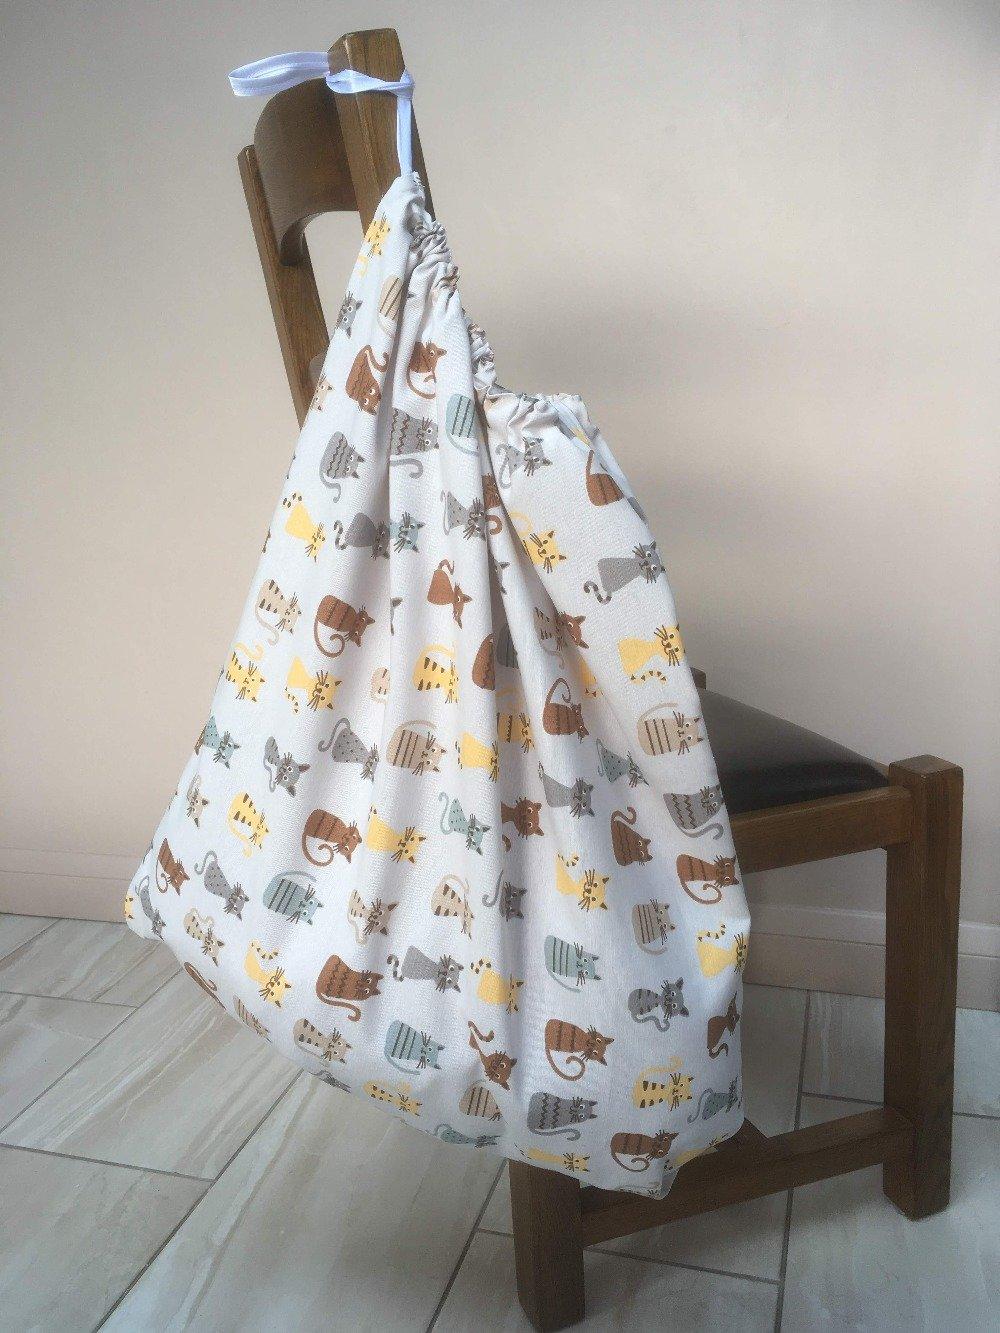 Large drawstring washbag for uniforms to avoid infection from Covid etc Cats design